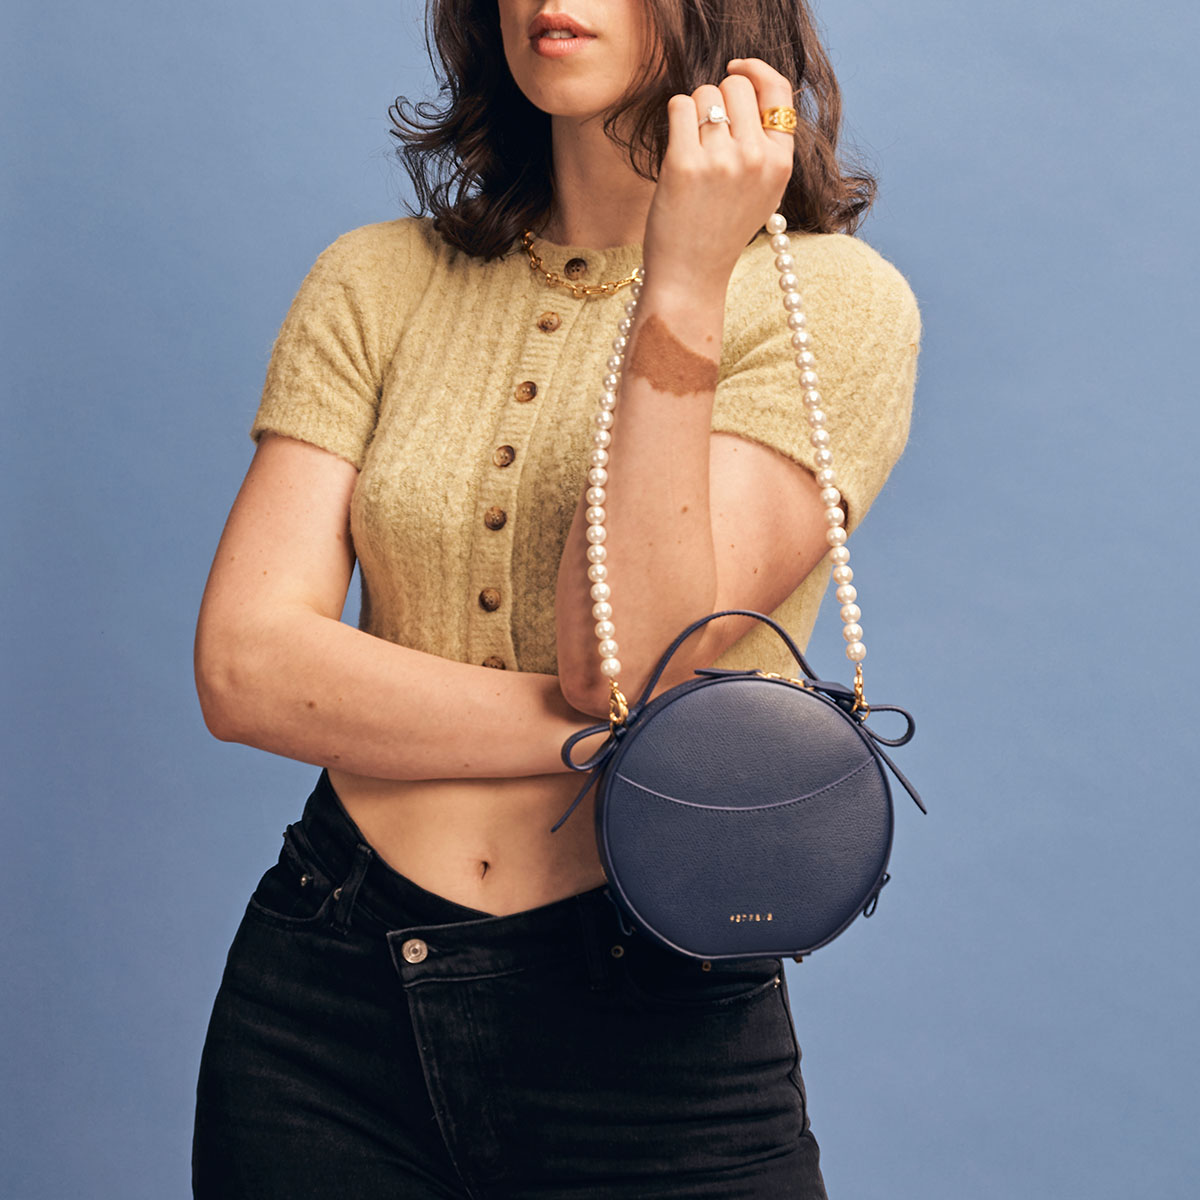 Circa Bag Pebbled Marine with Gold Hardware Pearl Shoulder Chain Attached Woman with Fair Skin Holding the Bag in Front of Her Wearing a Yellow Collared Shirt and Black Pants